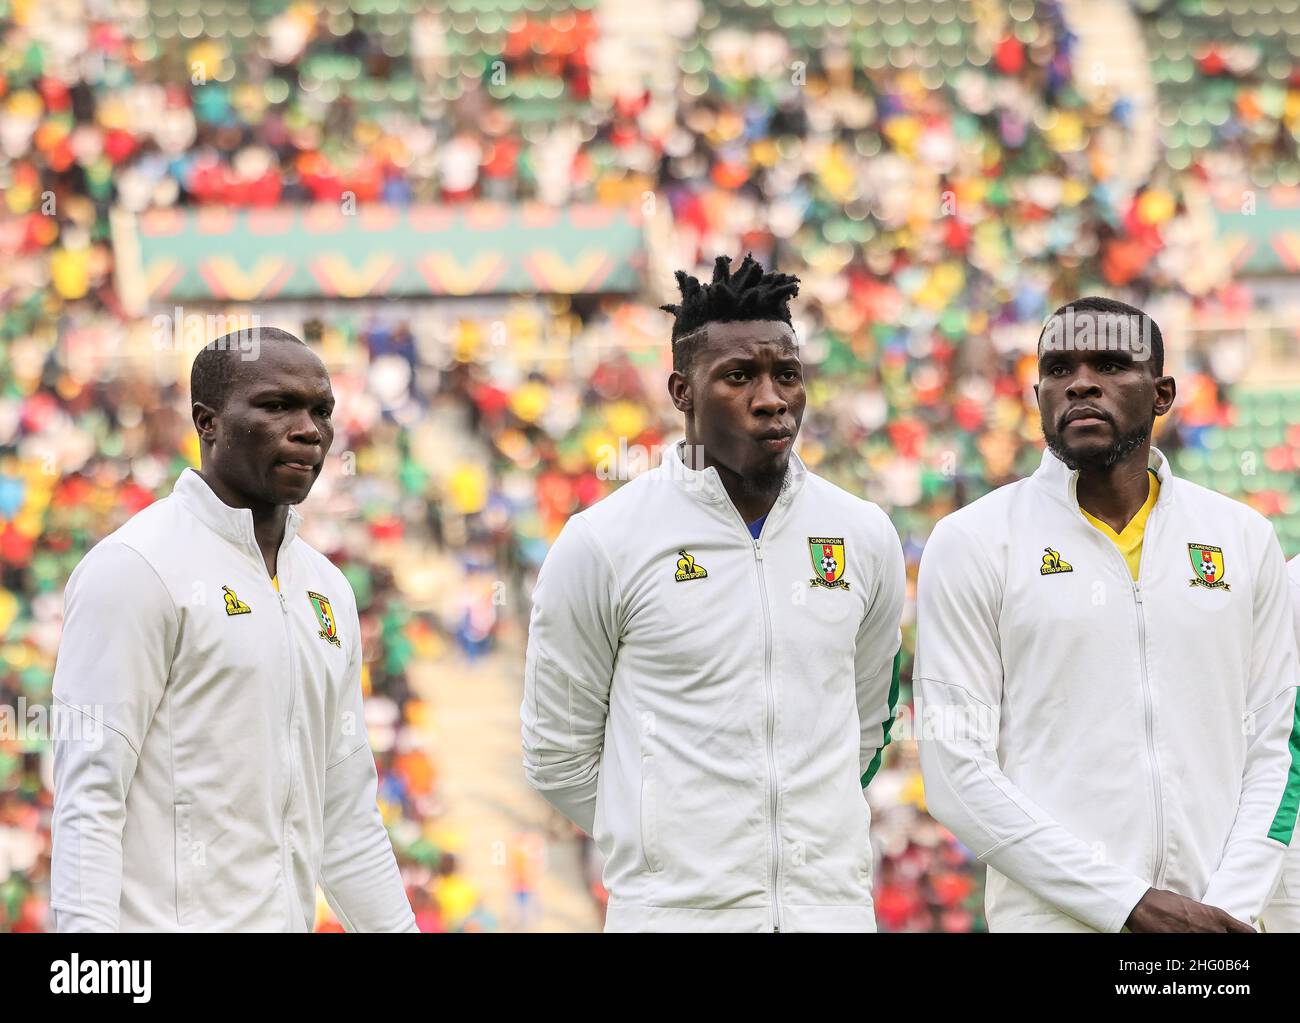 YAOUNDE, CAMEROON - JANUARY 17: (L) Vincent Aboubakar, Andre Onana, Collins Fai of Cameroon during the 2021 Africa Cup of Nations group A match between Cape Verde and Cameroon at Stade d'Olembe on January 17, 2022 in Yaounde, Cameroon. (Photo by SF) Stock Photo